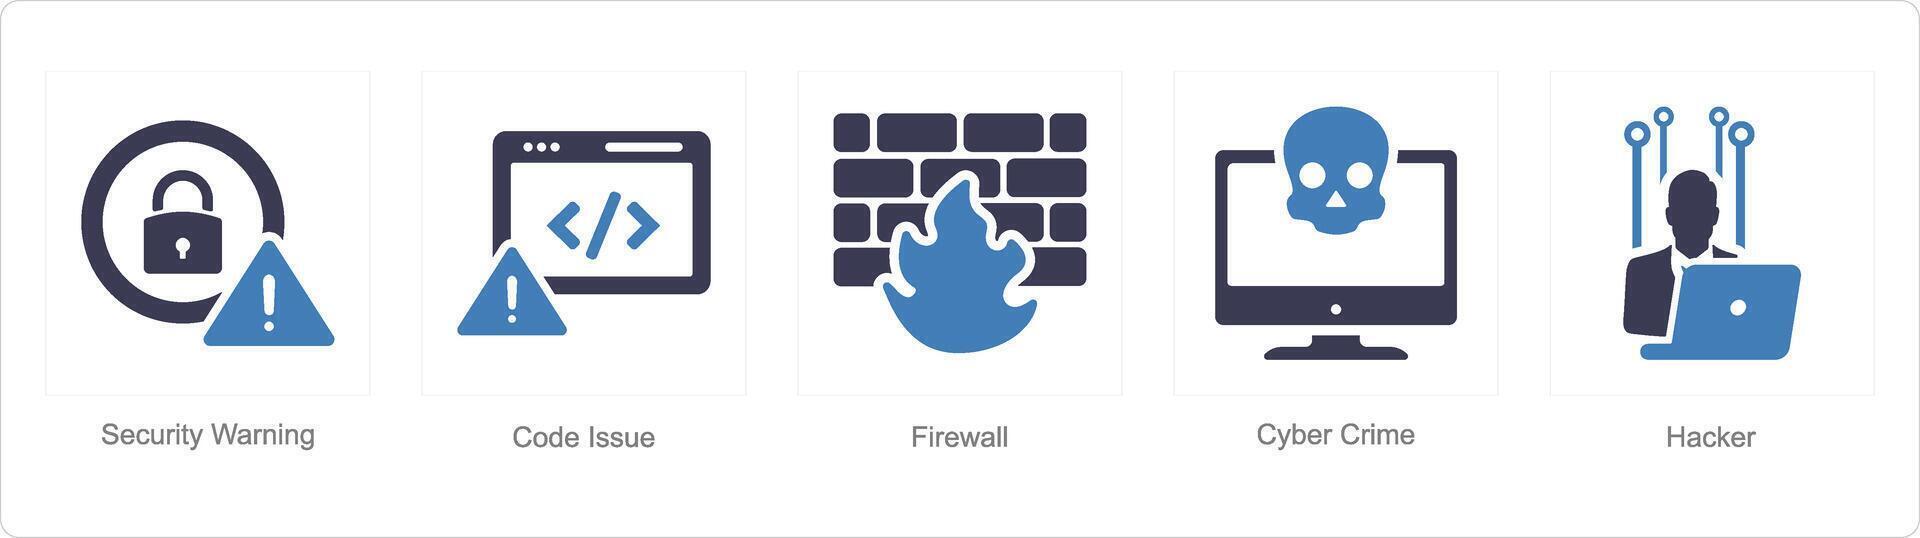 A set of 5 Cyber Security icons as security warning, code issue, firewall vector